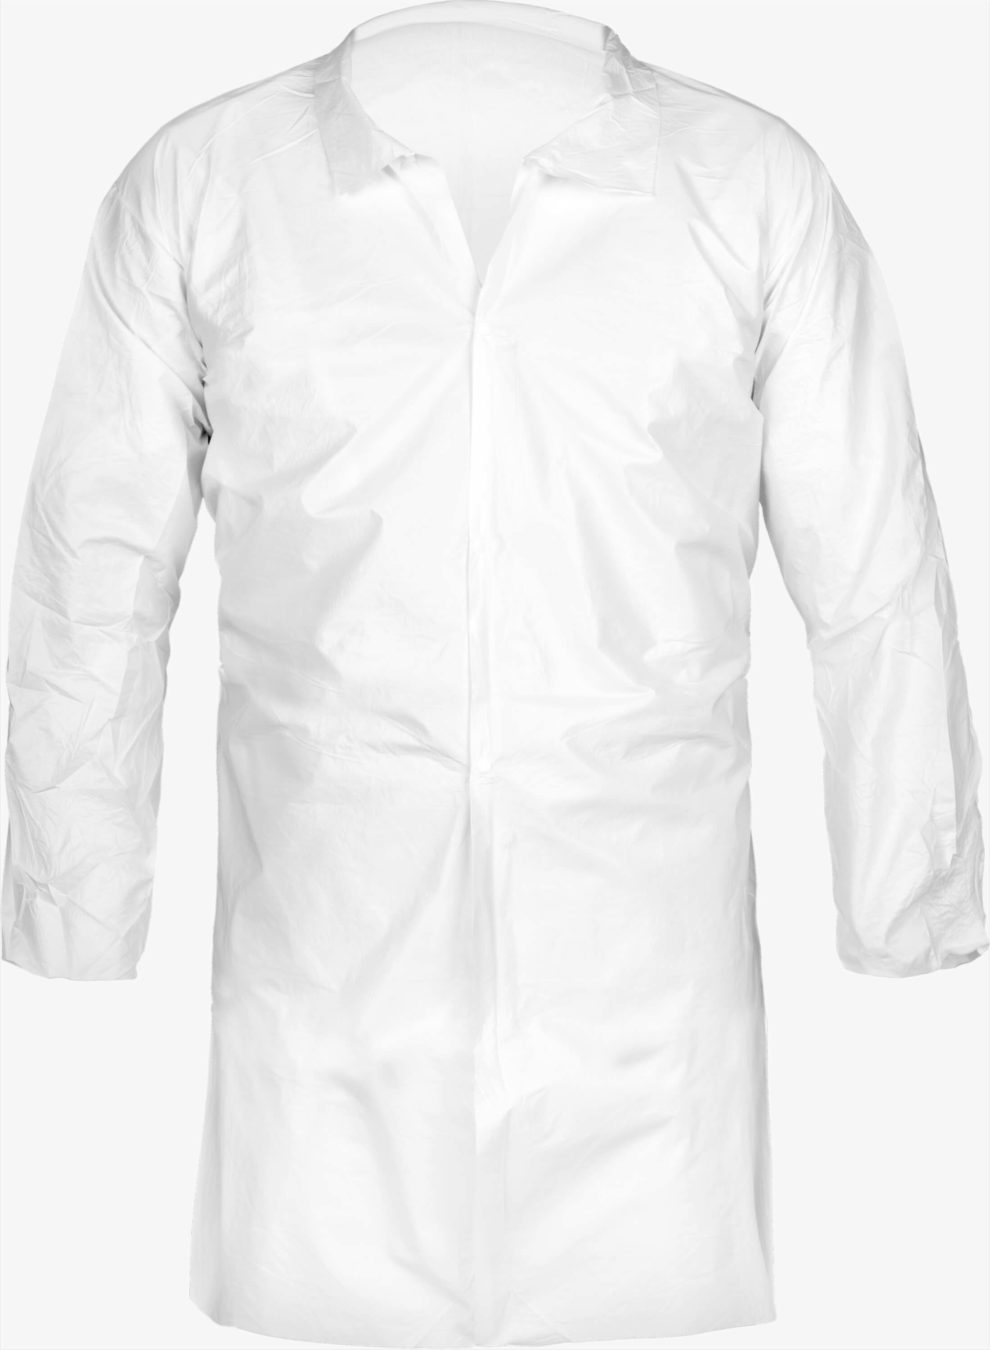 MicroMax® NS White Long Sleeve Lab Coat